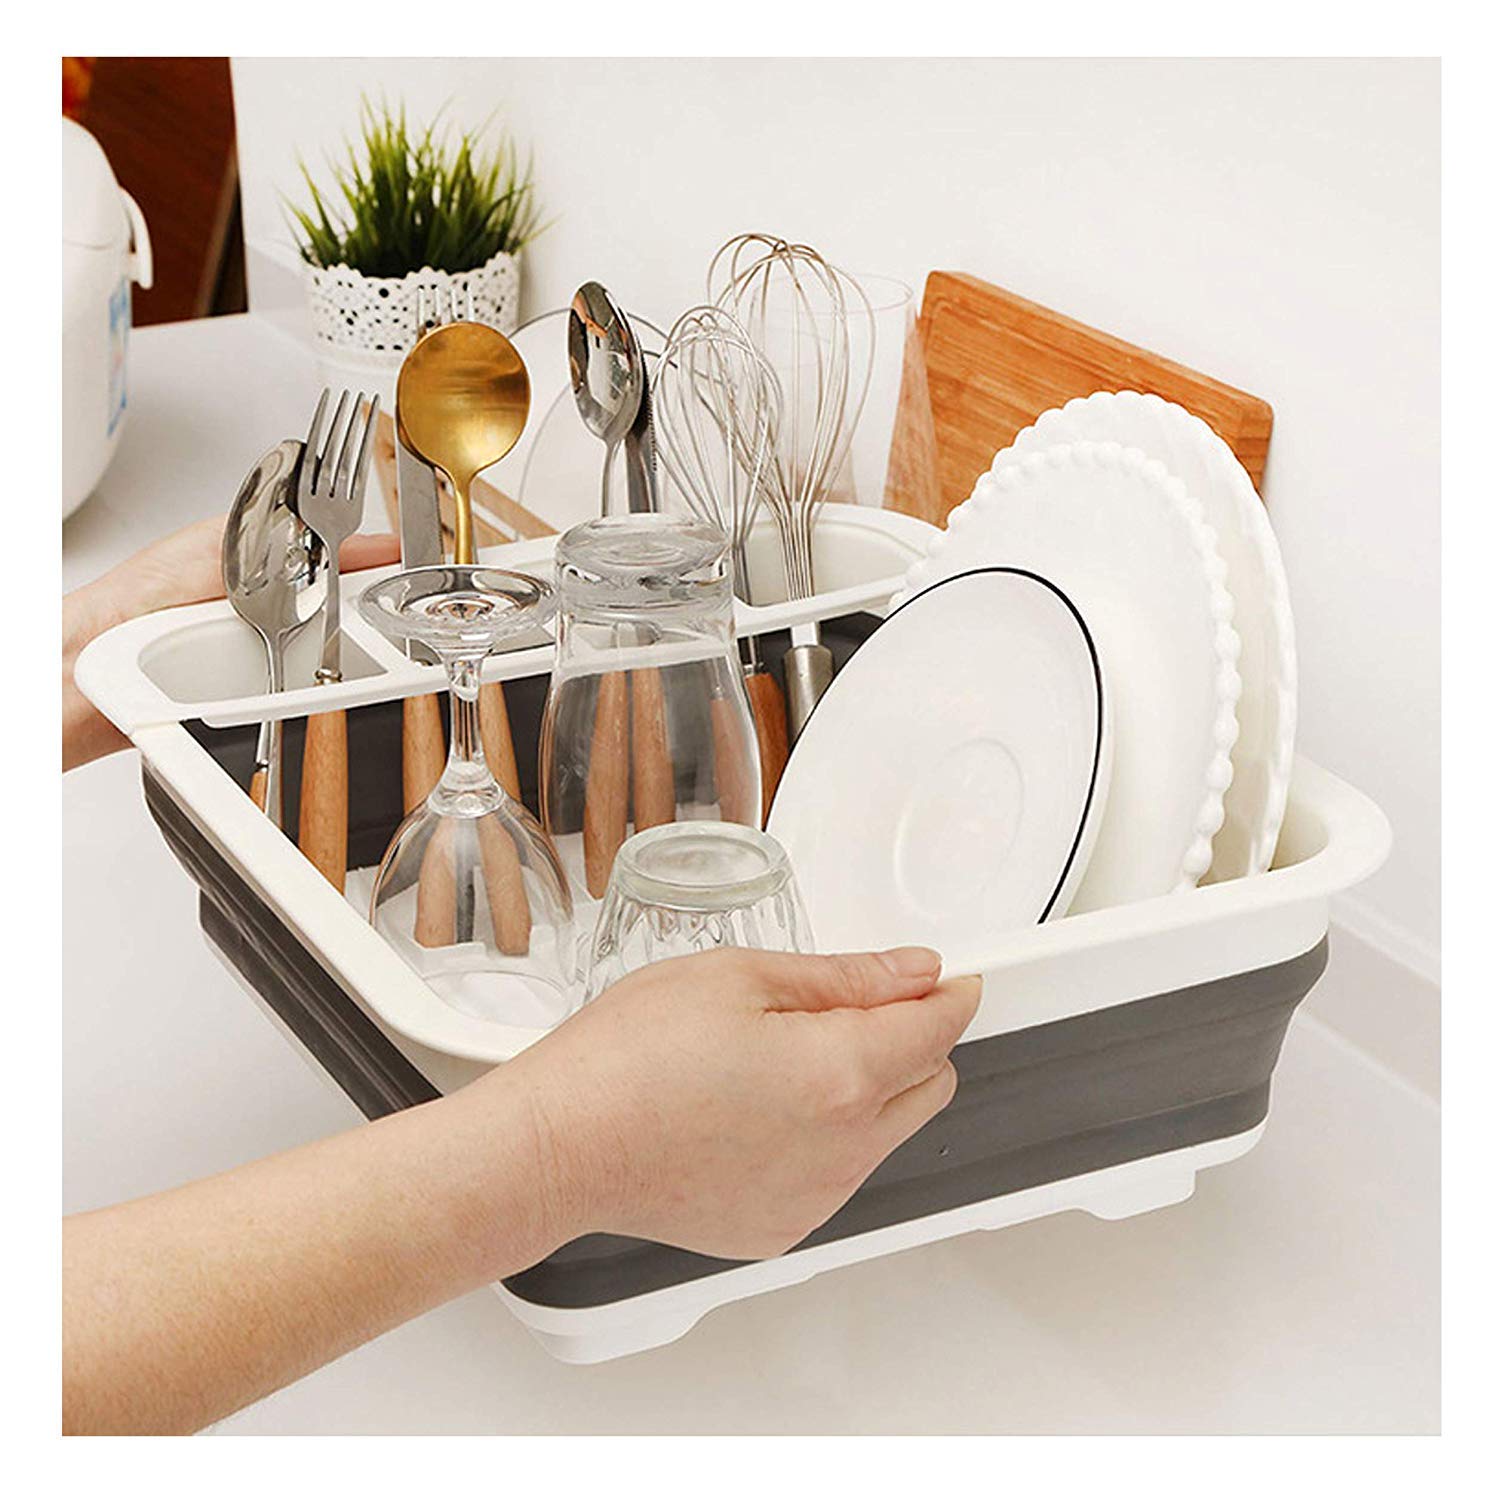 Collapsible Dish Drying Rack, Foldable Dish Rack Dish Drainer